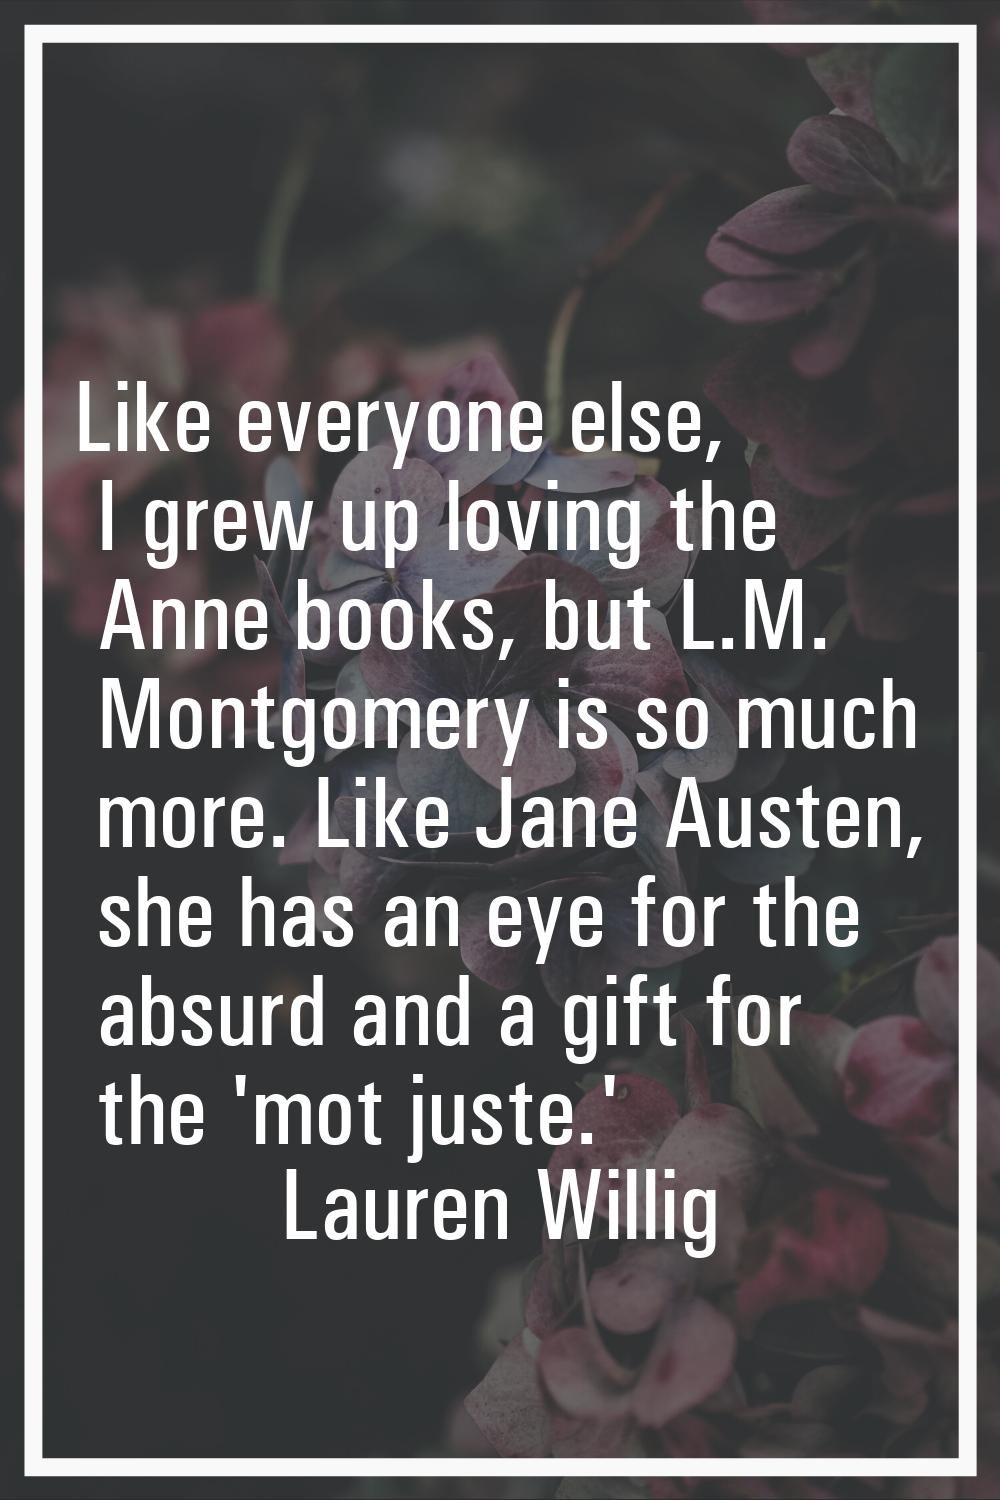 Like everyone else, I grew up loving the Anne books, but L.M. Montgomery is so much more. Like Jane